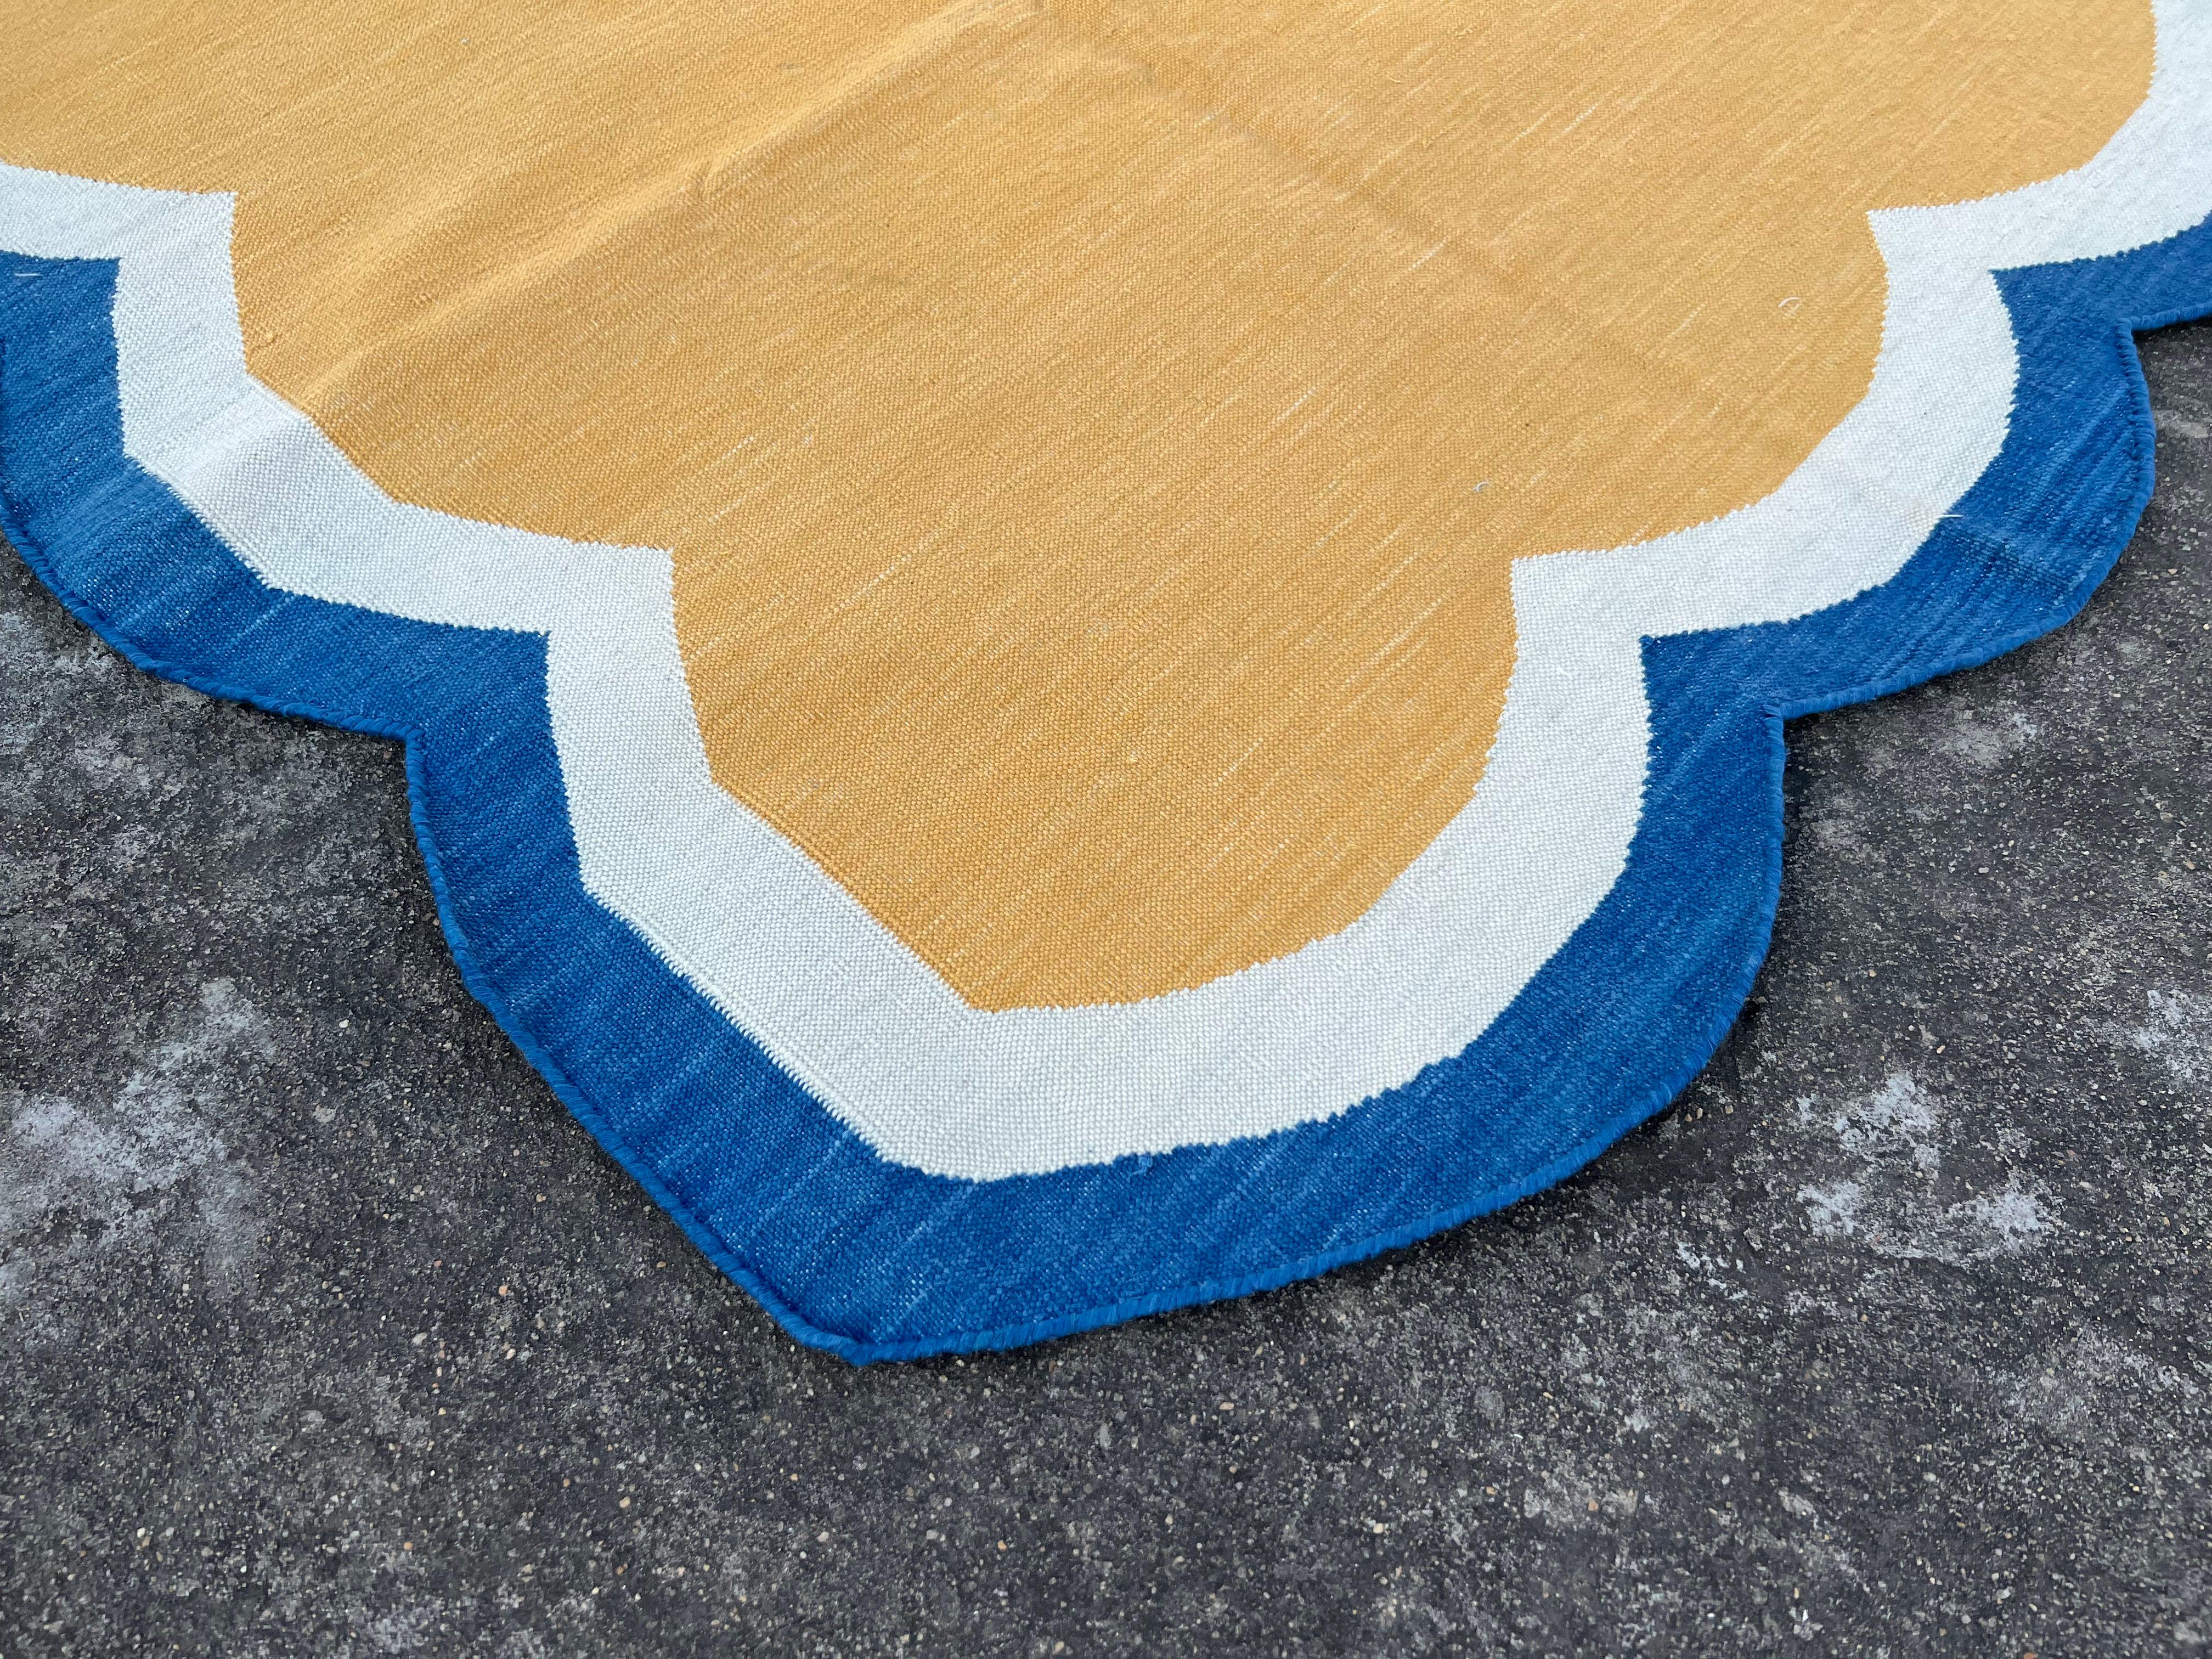 Mid-Century Modern Handmade Cotton Area Flat Weave Rug, 3x3 Yellow And Blue Scalloped Kilim Dhurrie For Sale